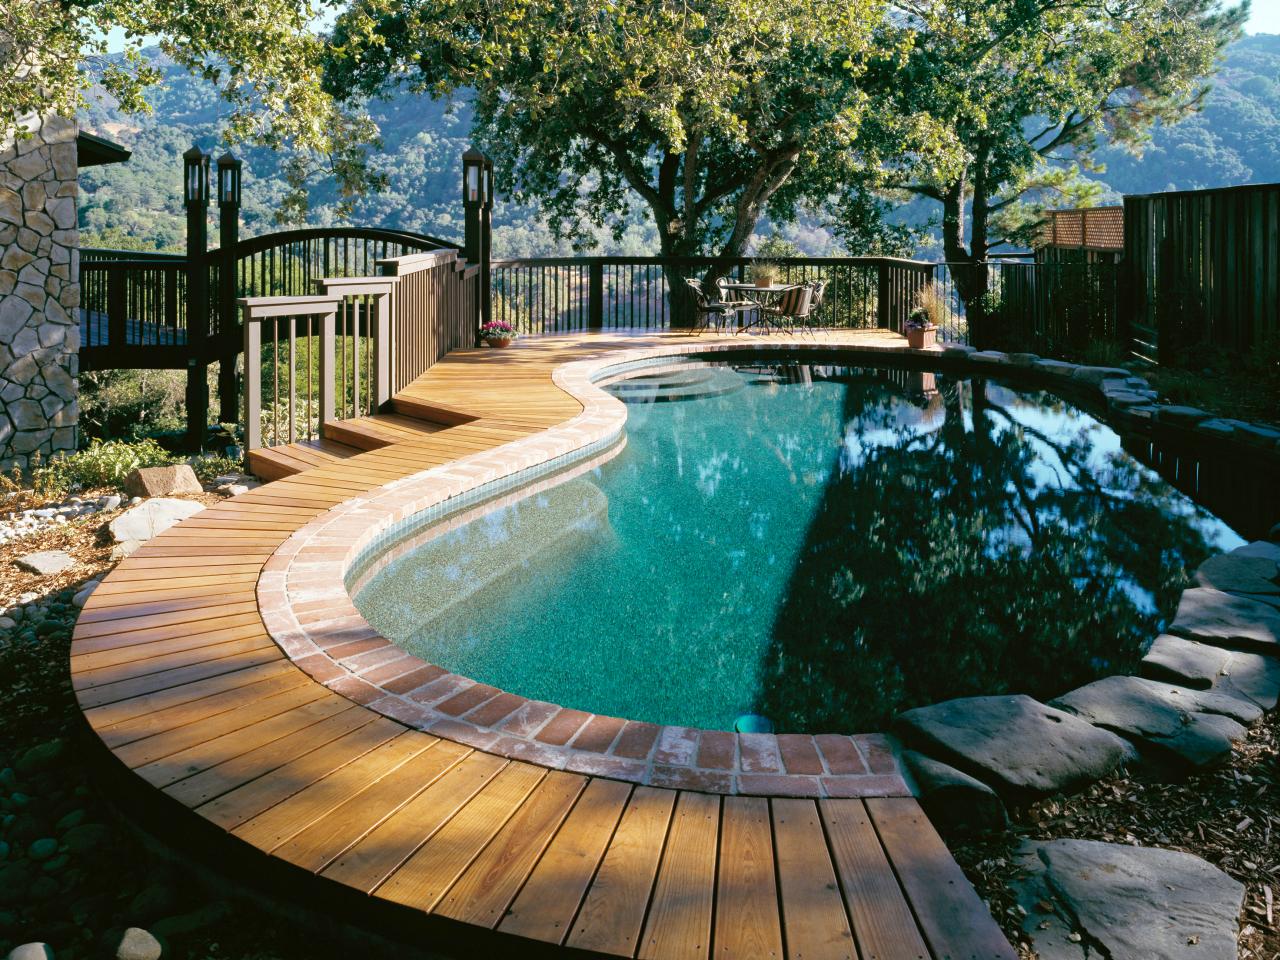 Pool Deck Designs And Options Diy, Deck Plans For Above Ground Pools